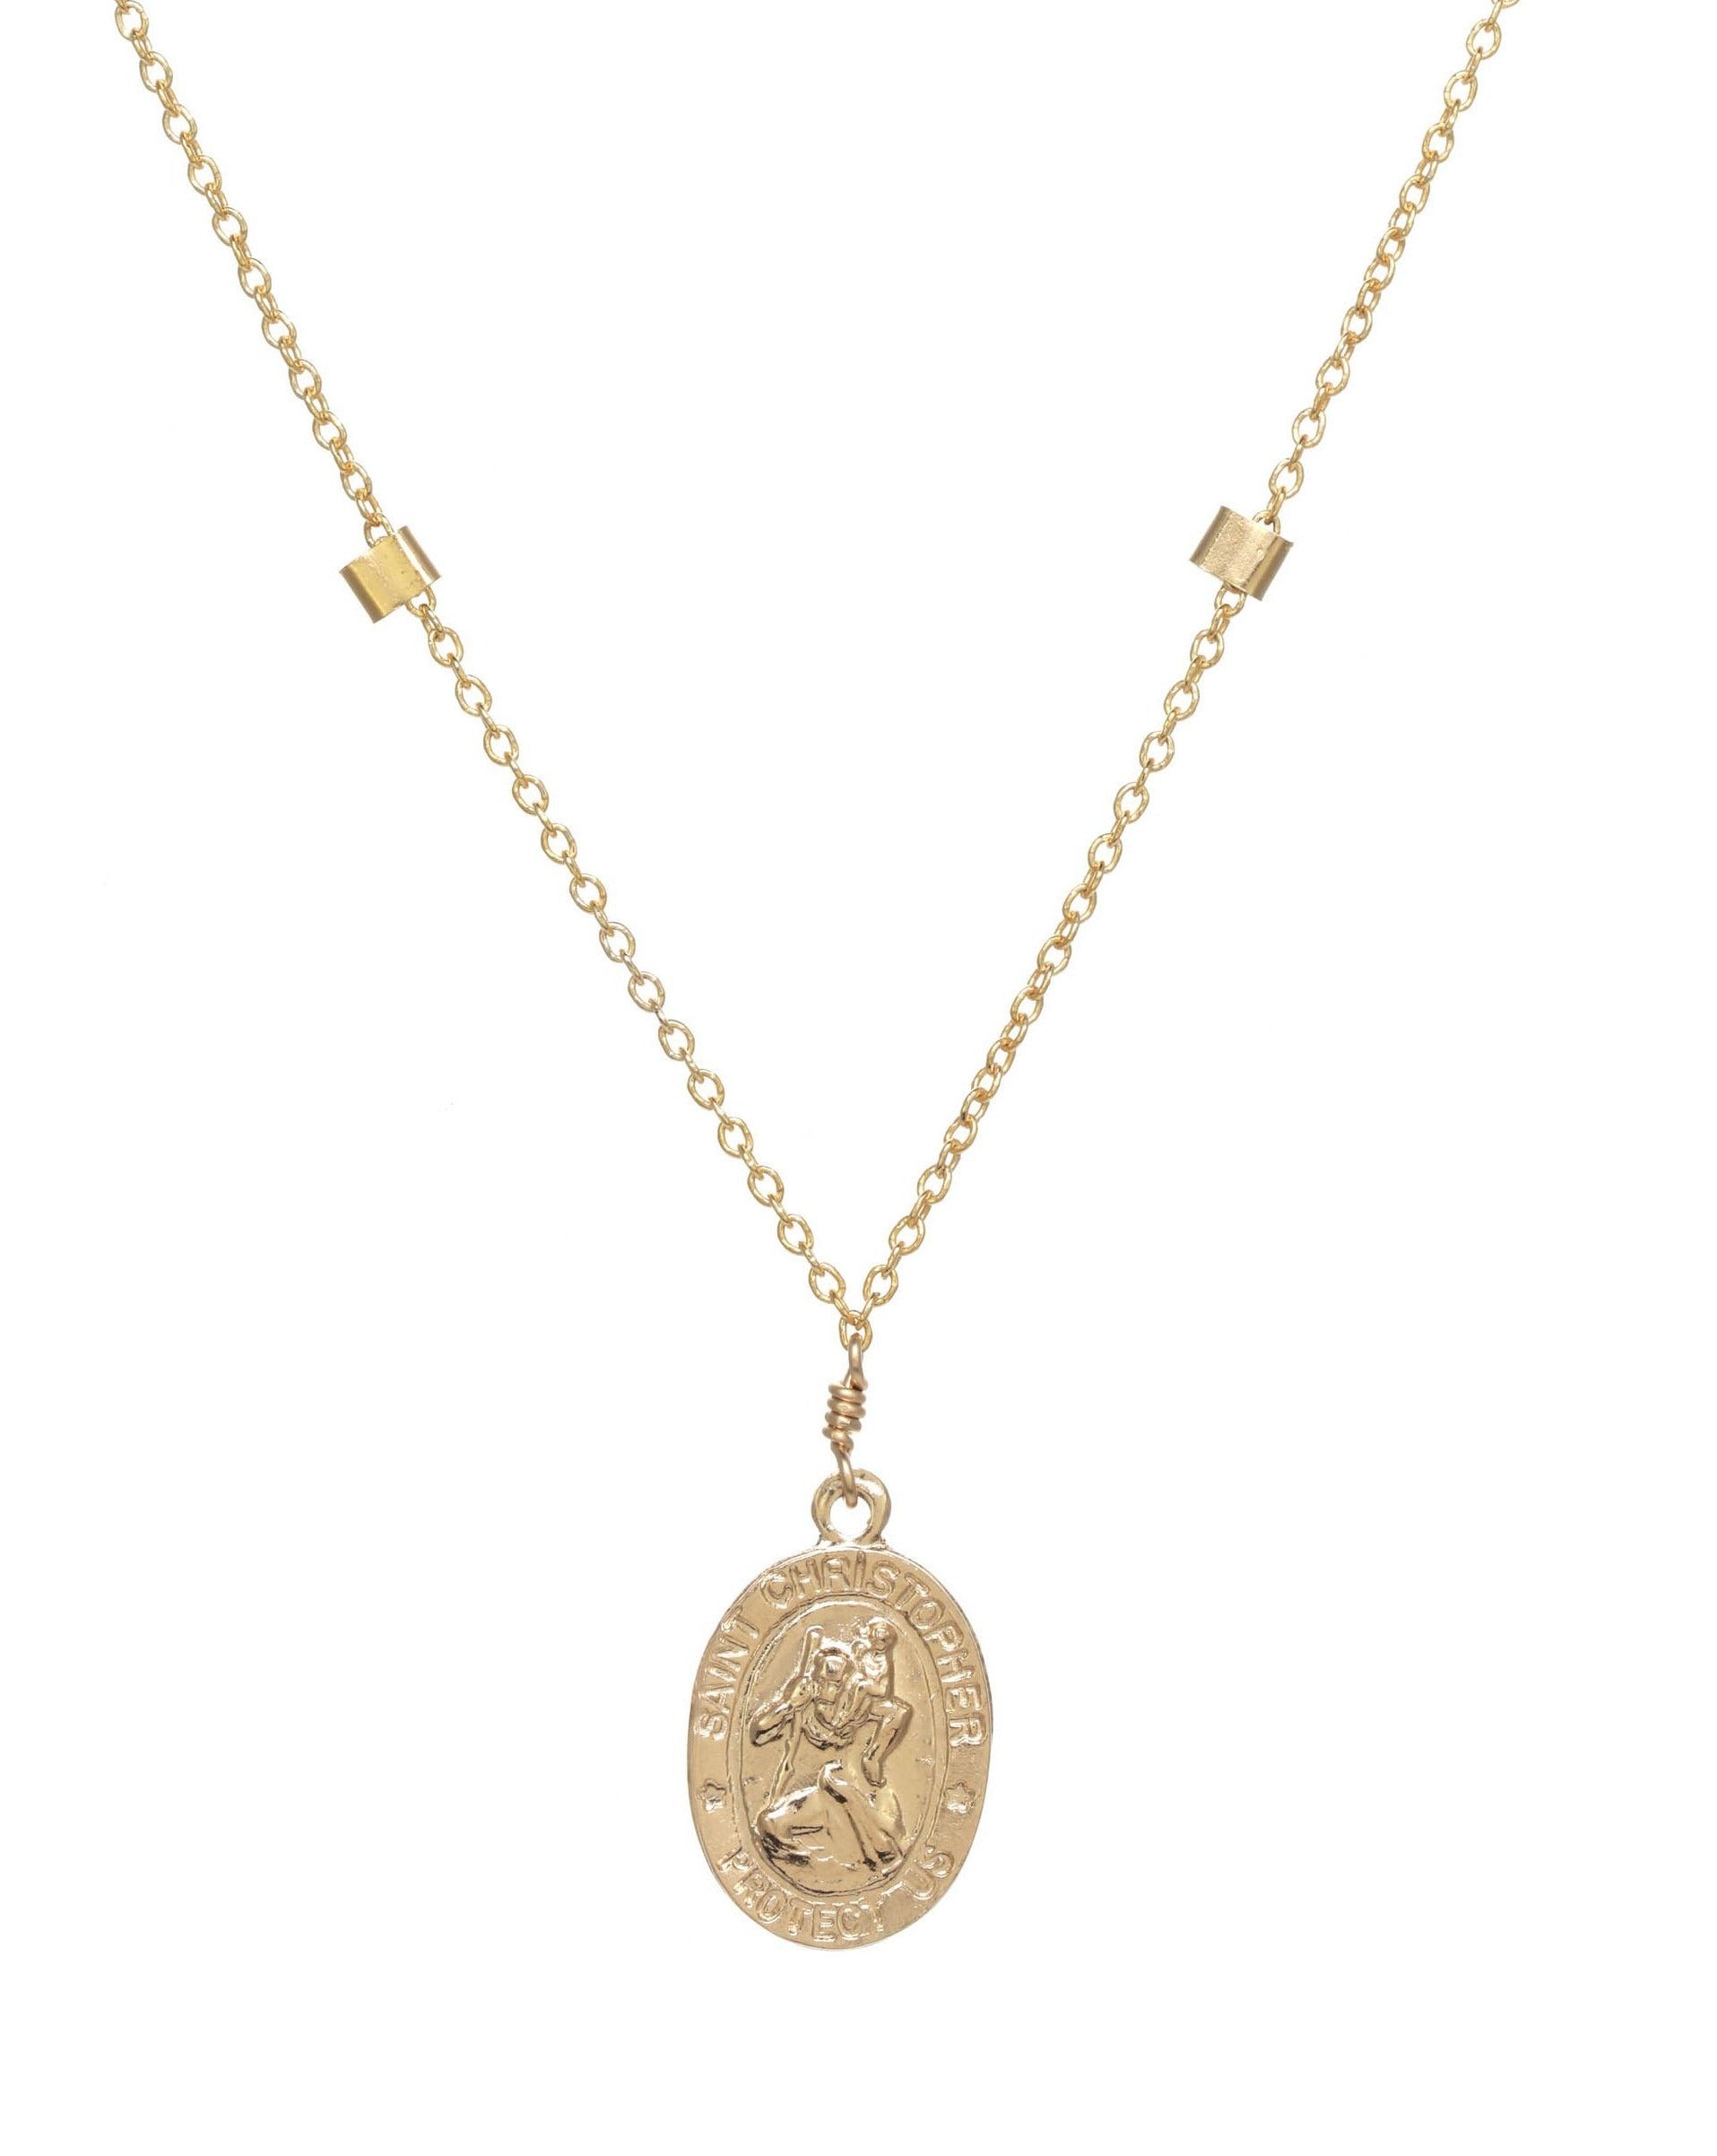 San Cris Oval Necklace by KOZAKH. A 16 to 18 inch adjustable length necklace, crafted in 14K Gold Filled, featuring a 16mm Saint Christopher oval Medallion.